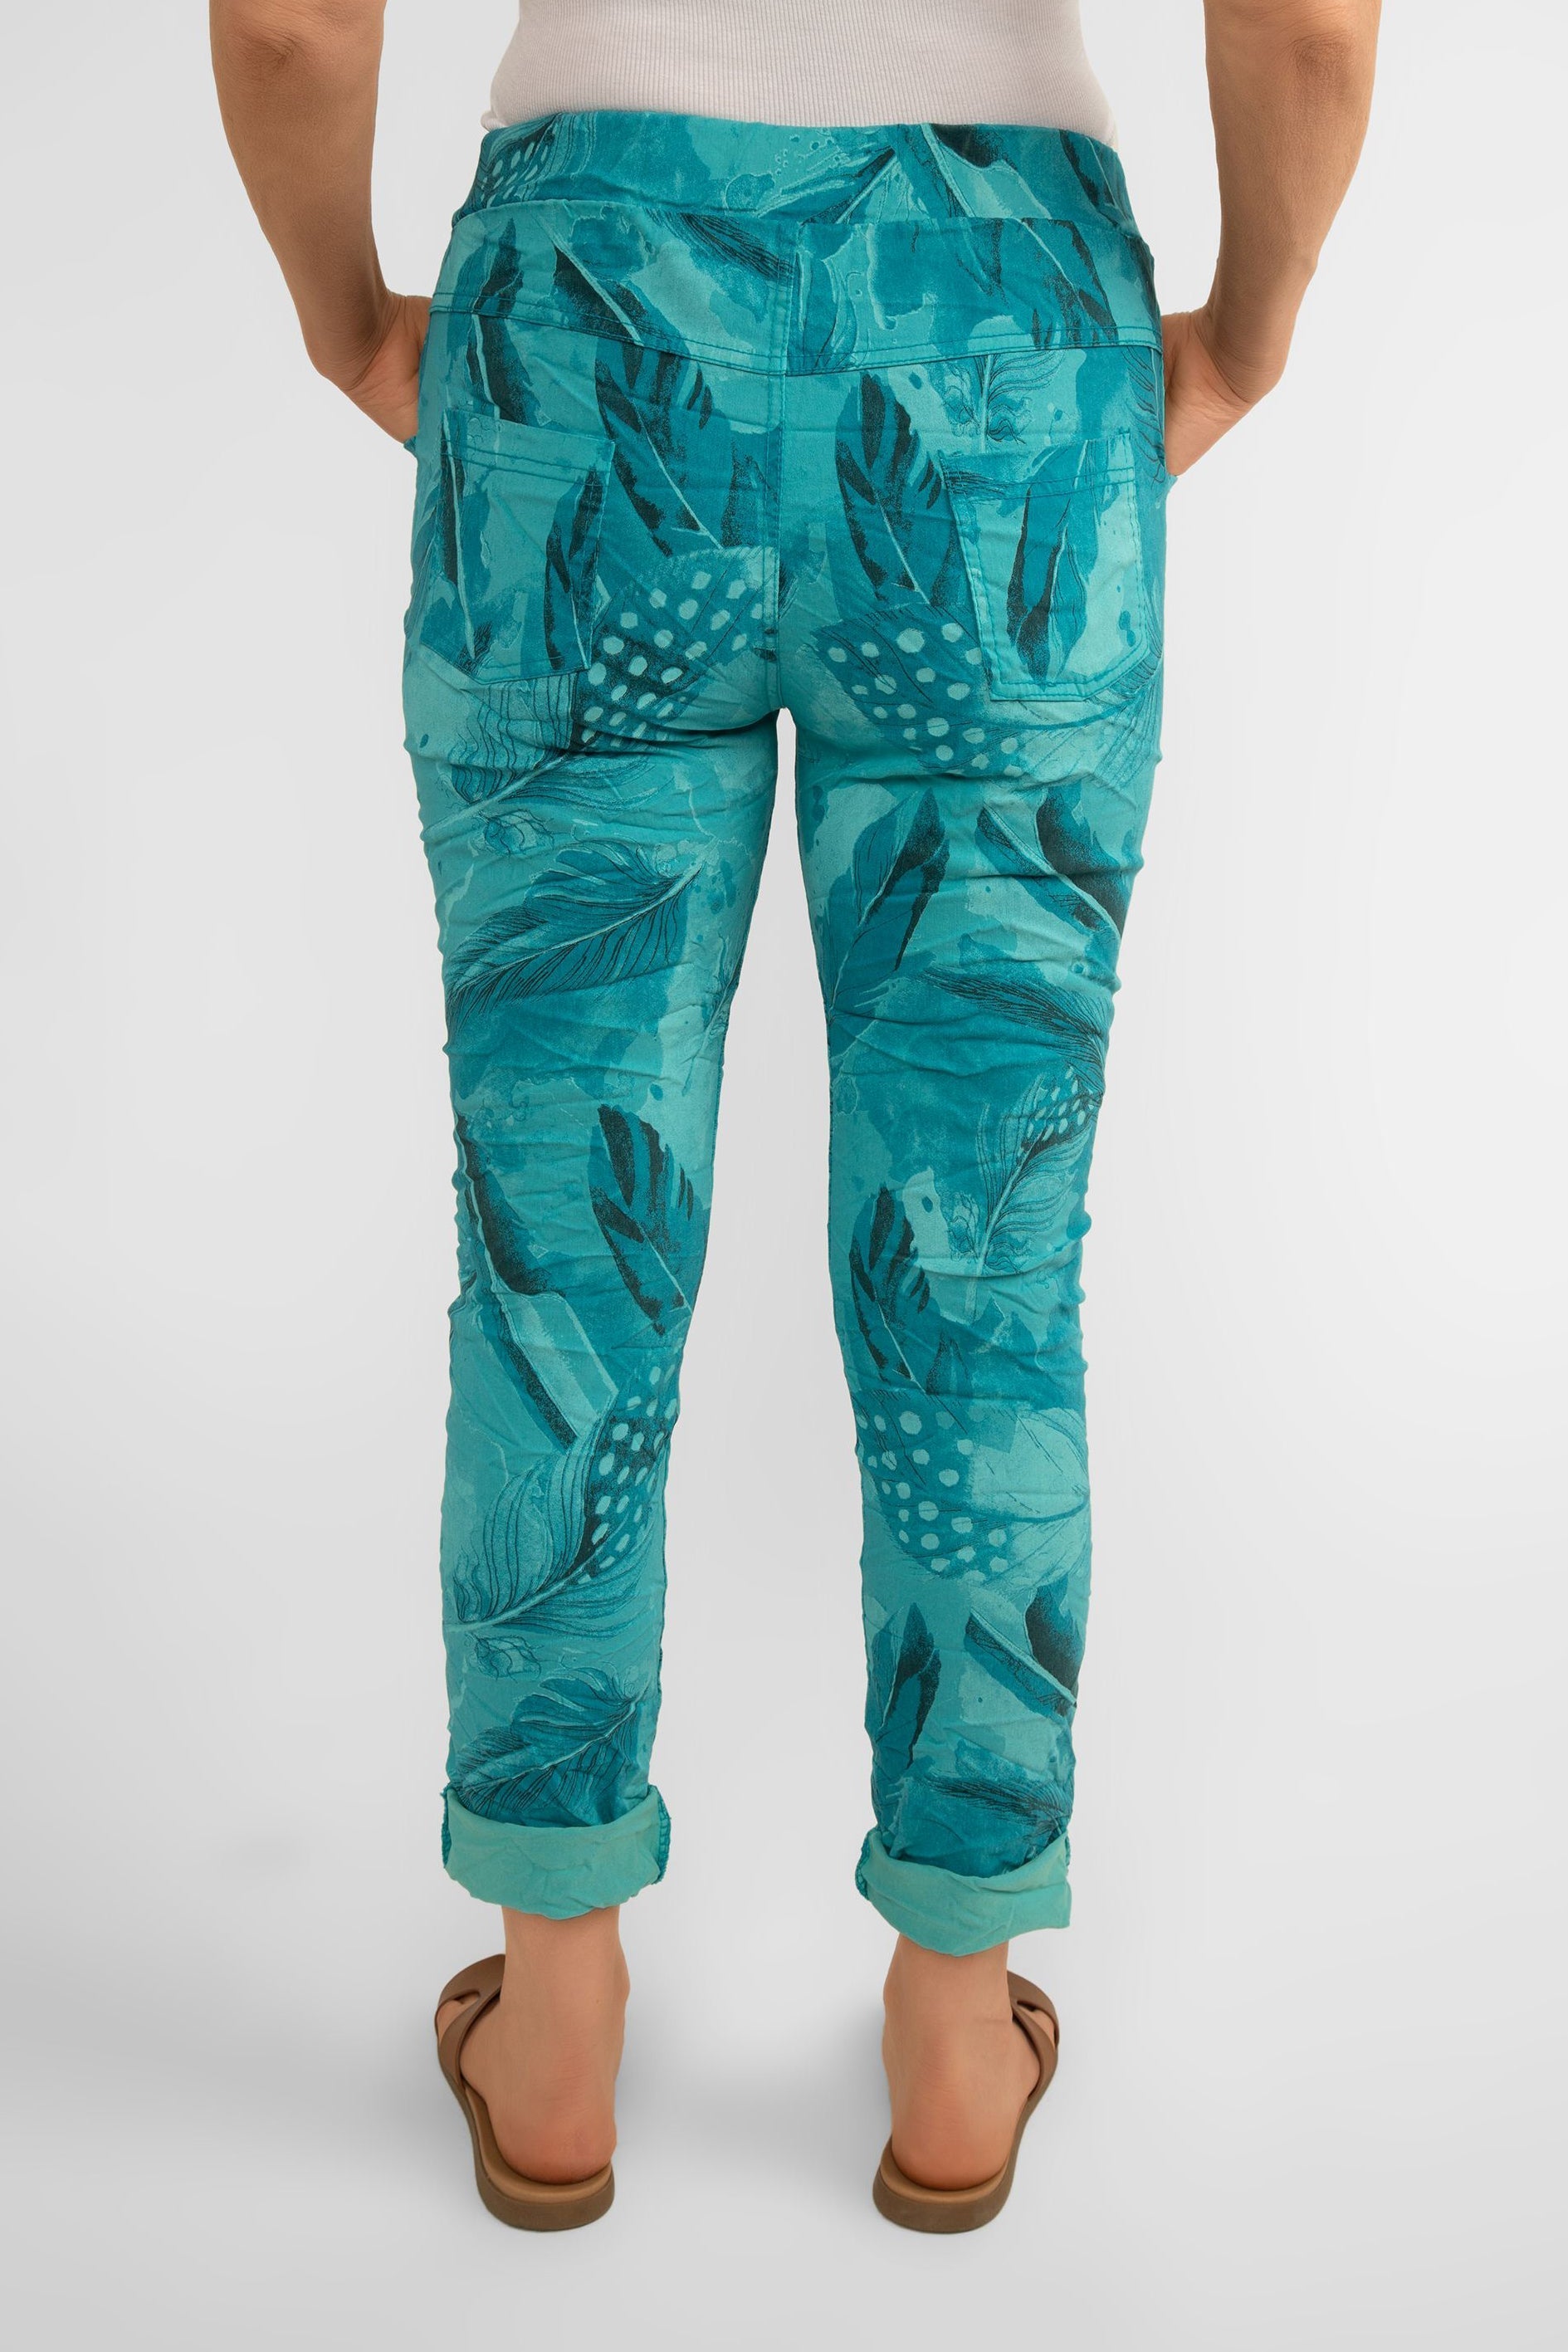 Back view of Bella Amore (21144) Women's Slim Fit Cropped Crinkle Pants with Side Pockets, Pull-on waist in Teal Feather Print